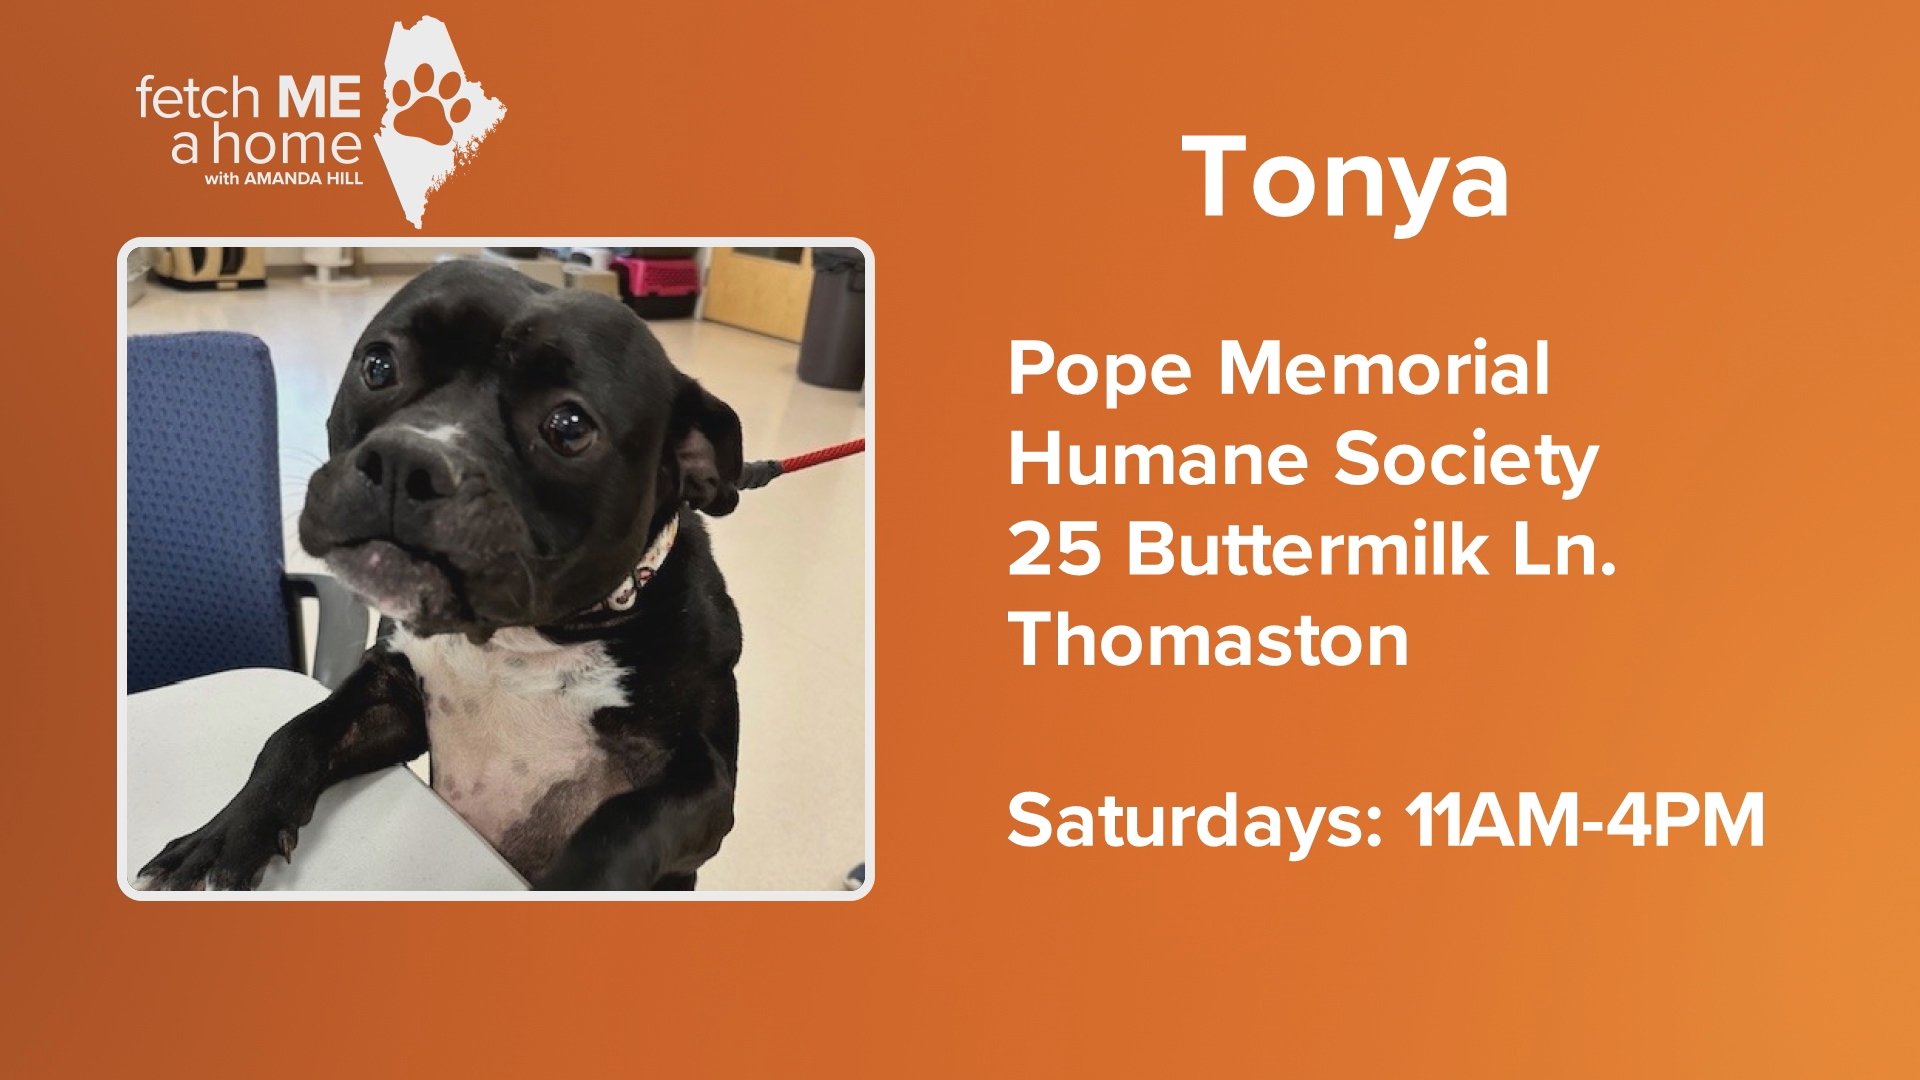 Tonya is a 3-year-old terrier/pit-bull mix who loves all people and snuggles.